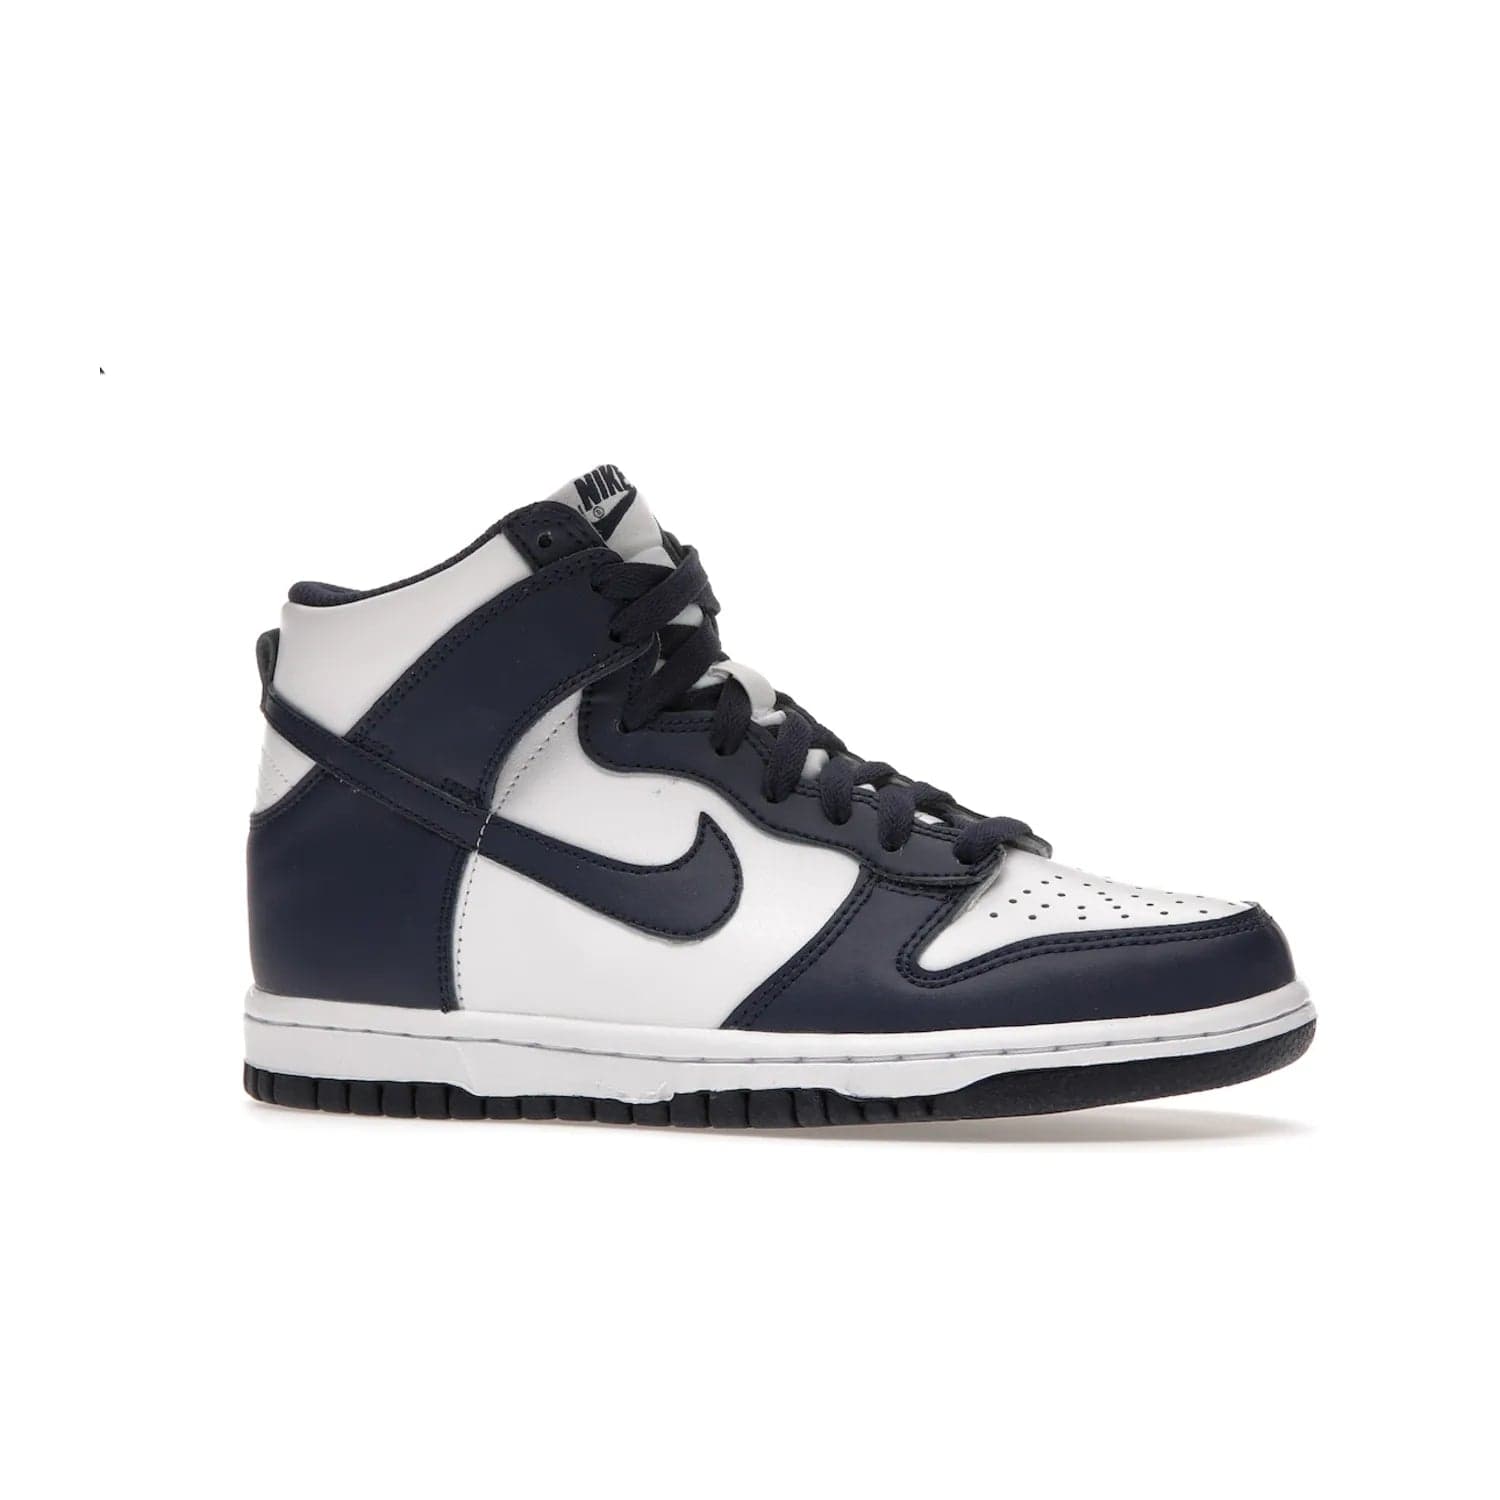 Nike Dunk High Championship Navy (GS) - Image 3 - Only at www.BallersClubKickz.com - Nike Dunk High Championship Navy GS: classic leather, suede, synthetic upper, chunky midsole, rubber herringbone sole. White base overlaid with Midnight Navy for a stylish finish. Padded high-cut collar and signature Nike swoosh design. Step out in these shoes and make a statement. Comfort and style at its finest.